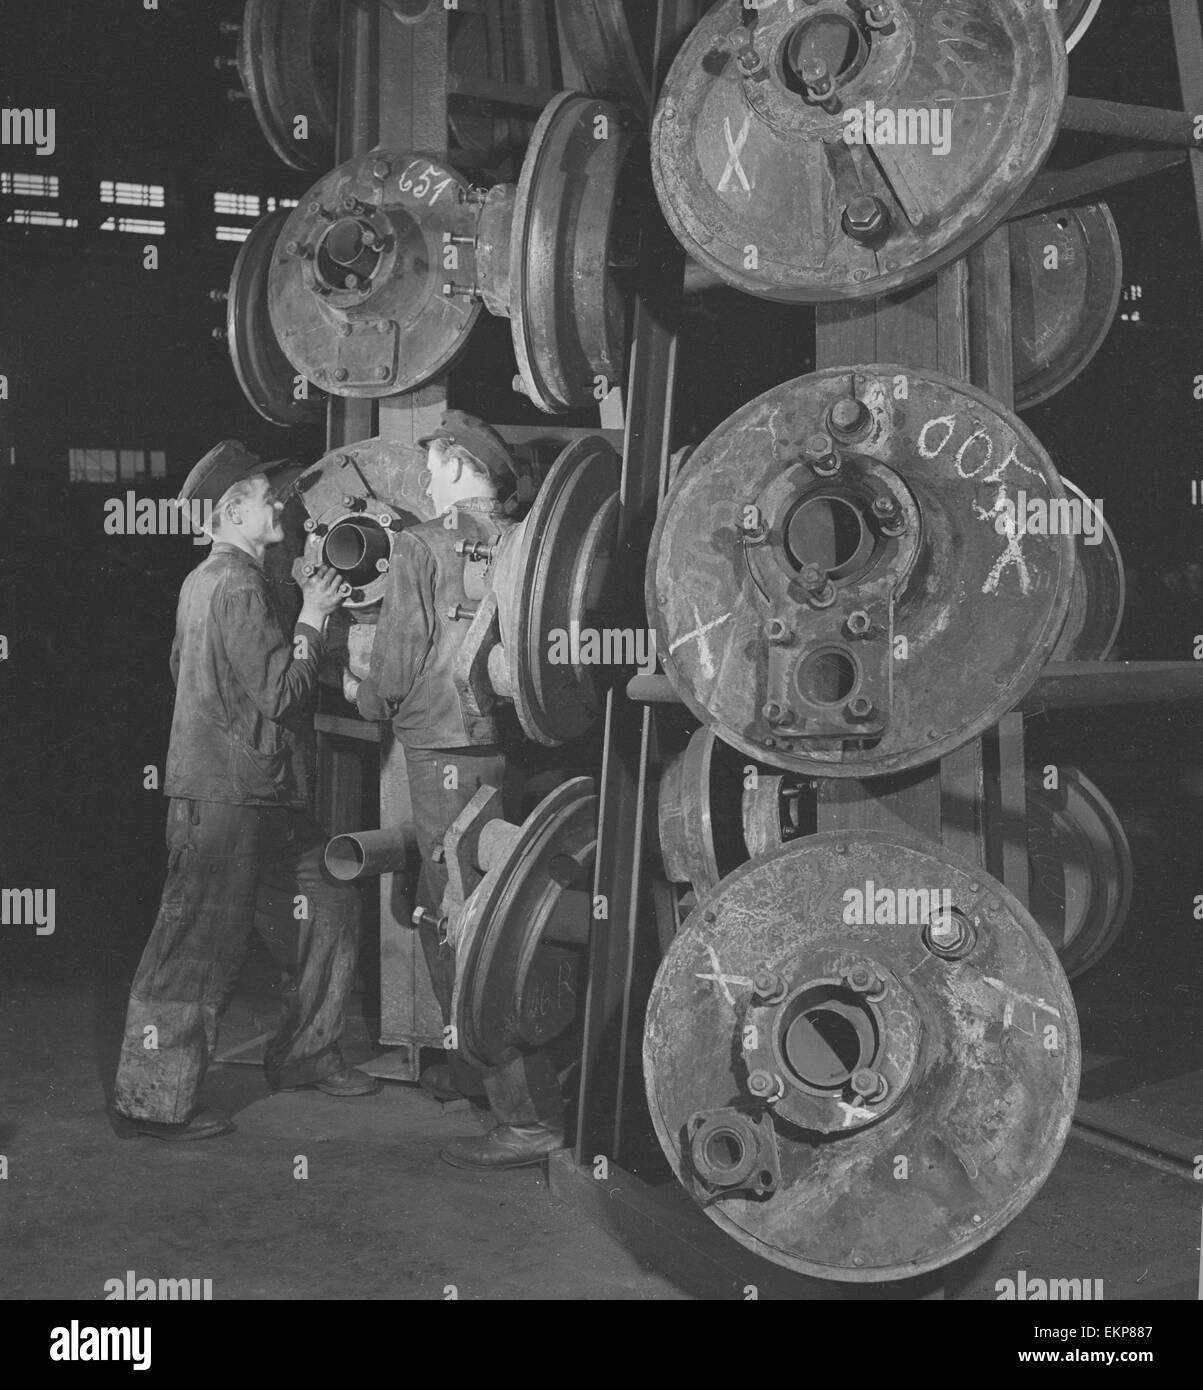 Engineers seen here selecting wheels at the Lowa Montages Fabrik Steam Locomotive repair facility in Essen, Germany. The factory formerly owned by Krupps employs 1,500 men and during the war this factory made tanks. Since June 1945 the factory has worked Stock Photo